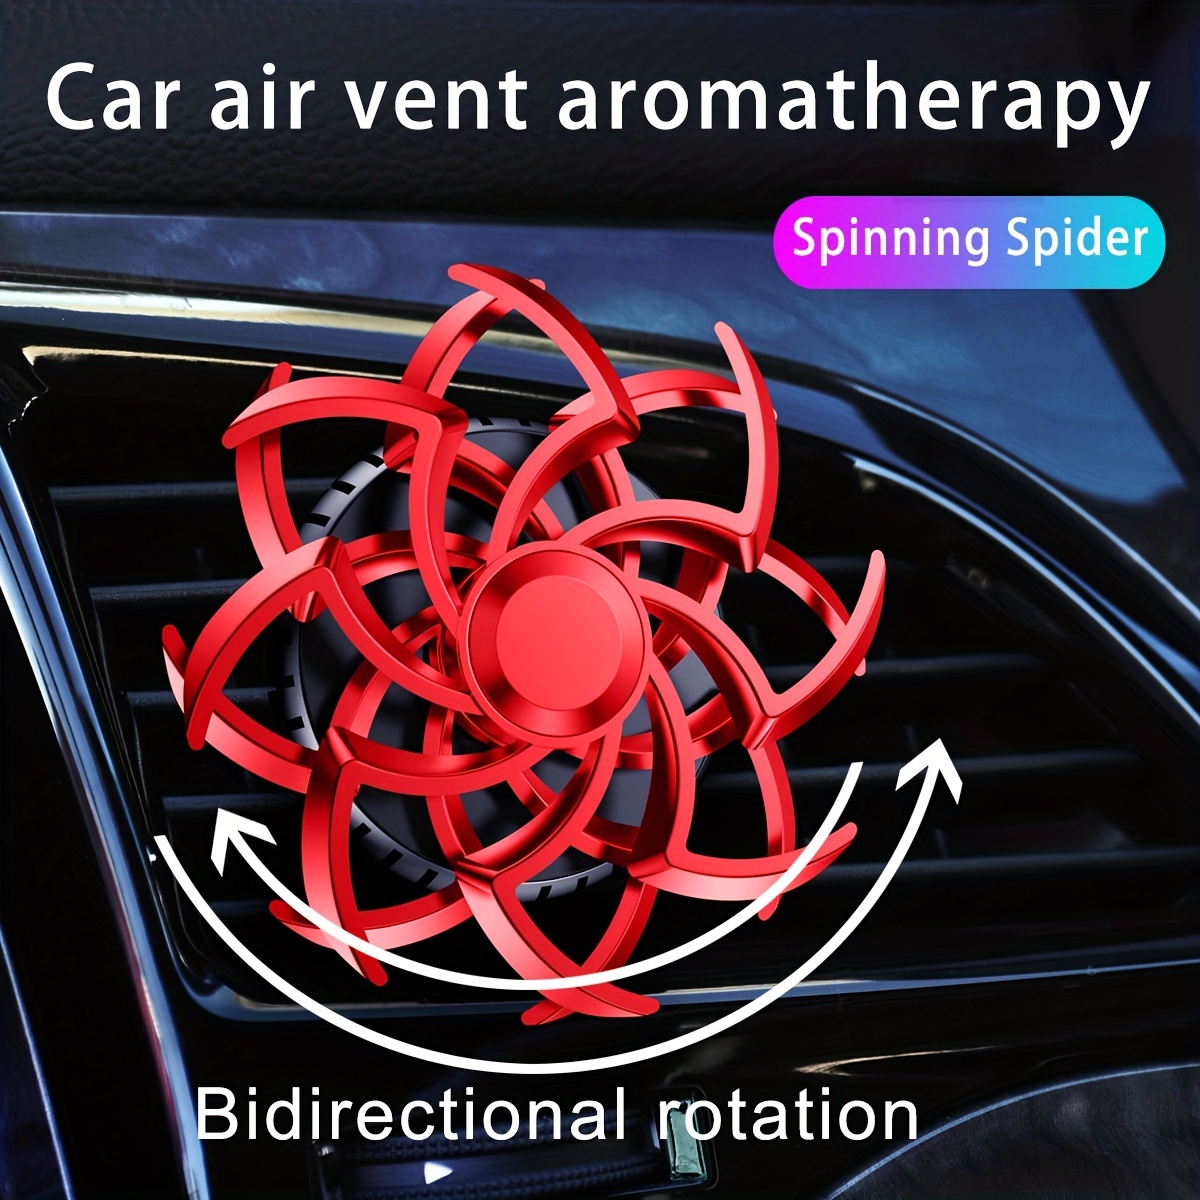 360° Rotating Car & Aromatherapy Diffuser - Freshen Up Your Car Interior!